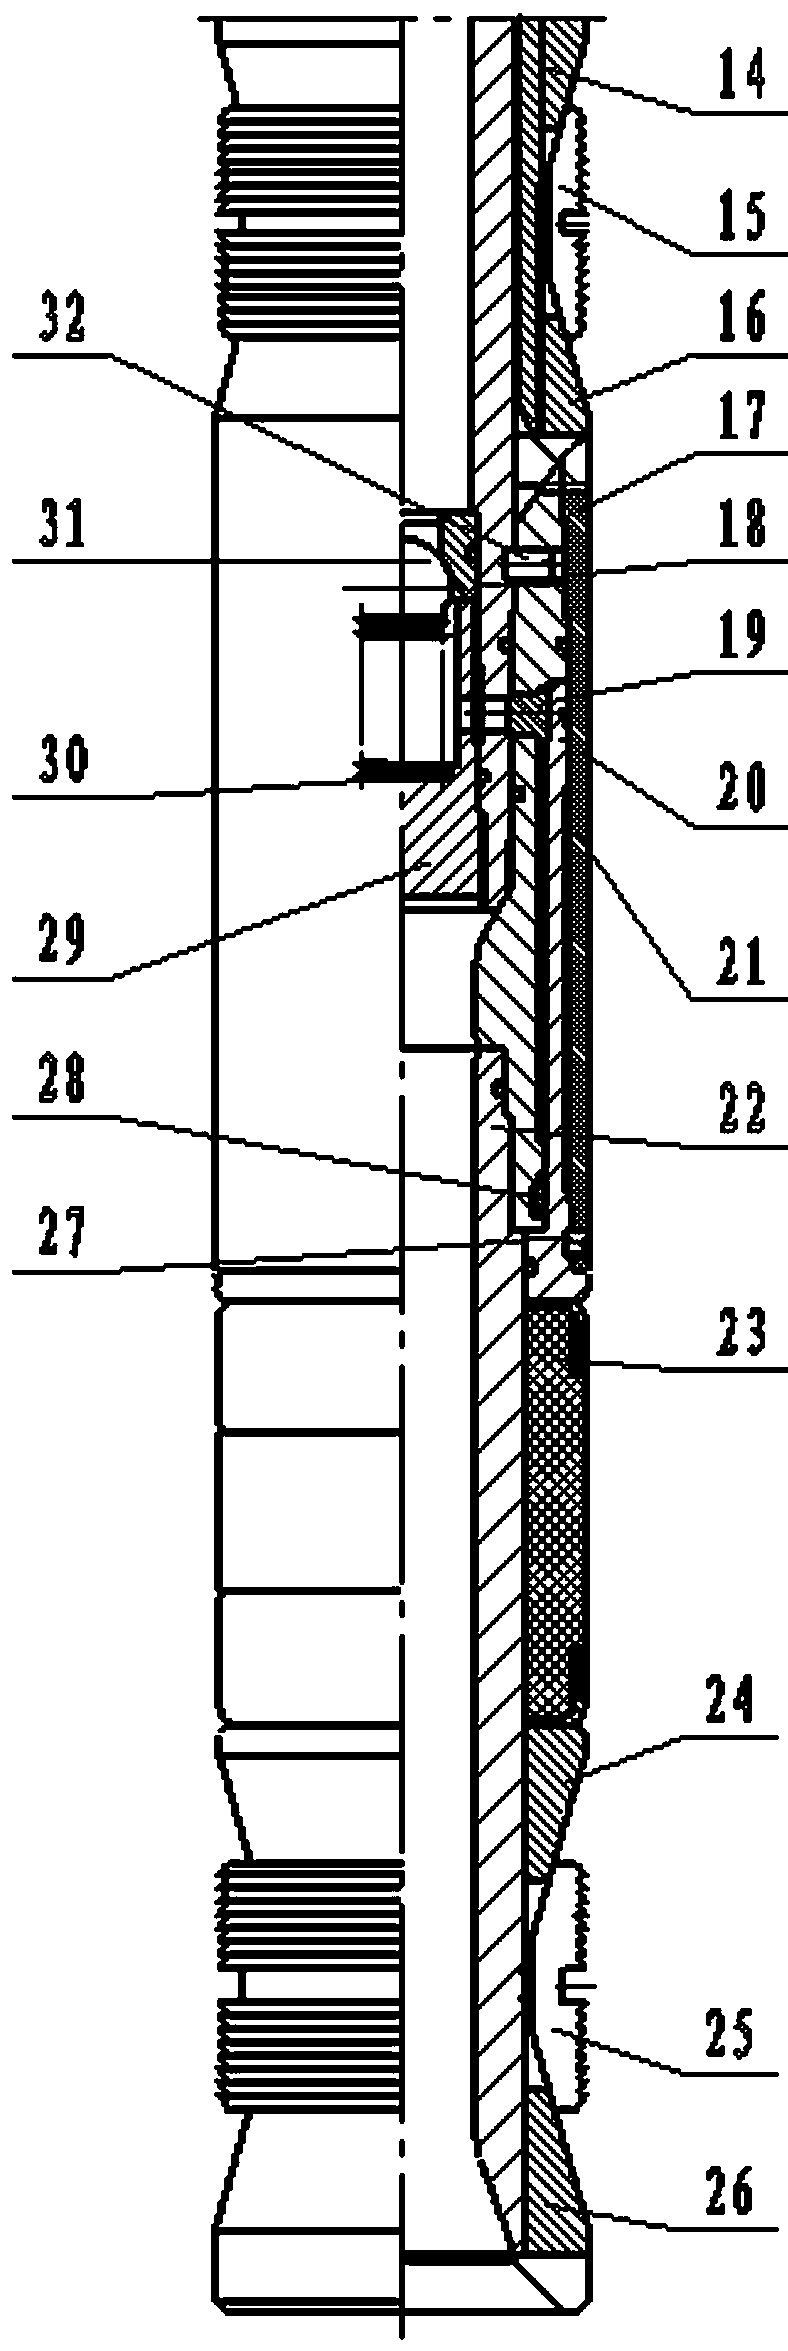 Separated layer water-flooding process tubular column capable of being drilled